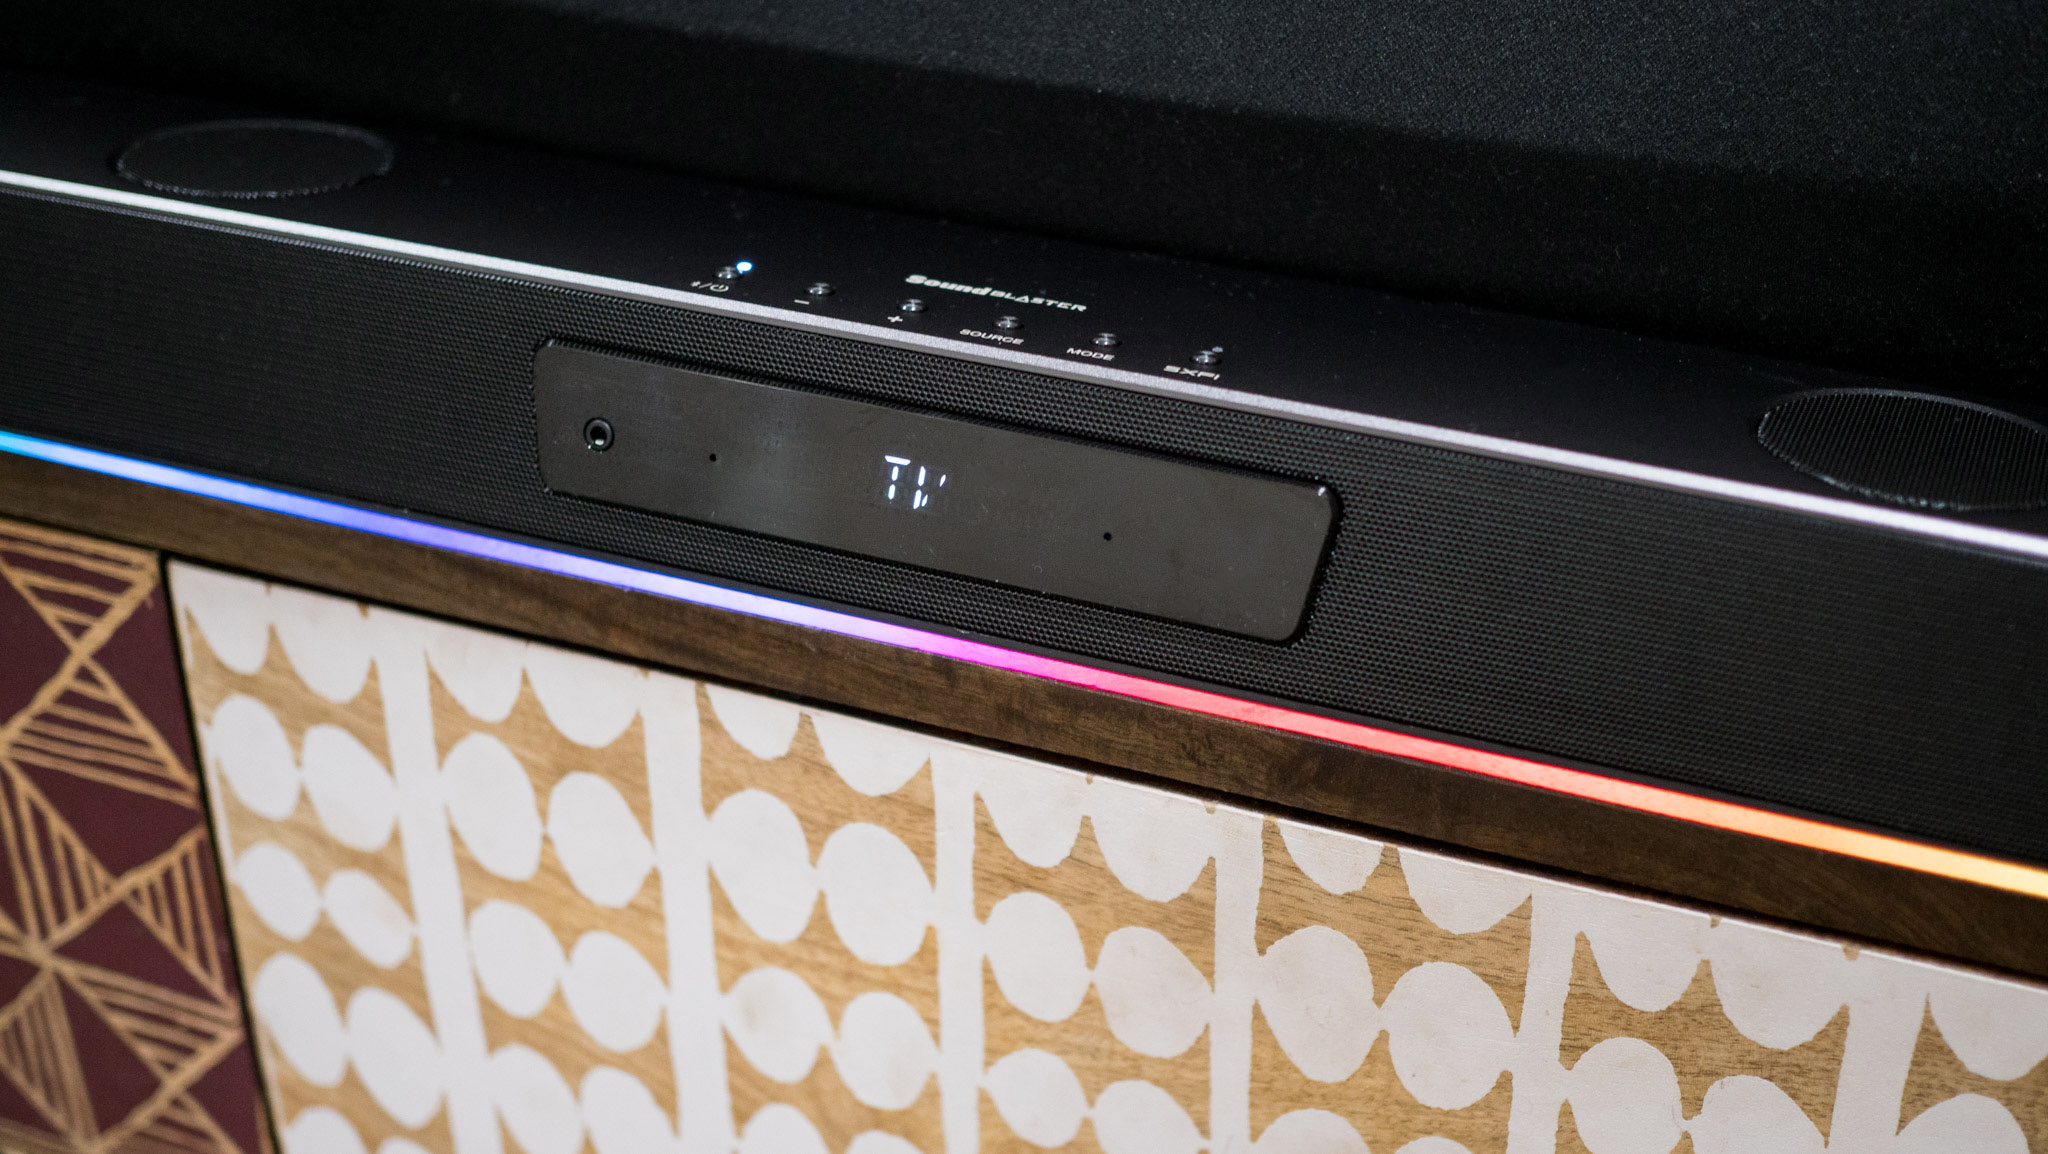 Creative Sound Blaster Katana V2X Central small rooms review: is gaming This for soundbar Android | ideal